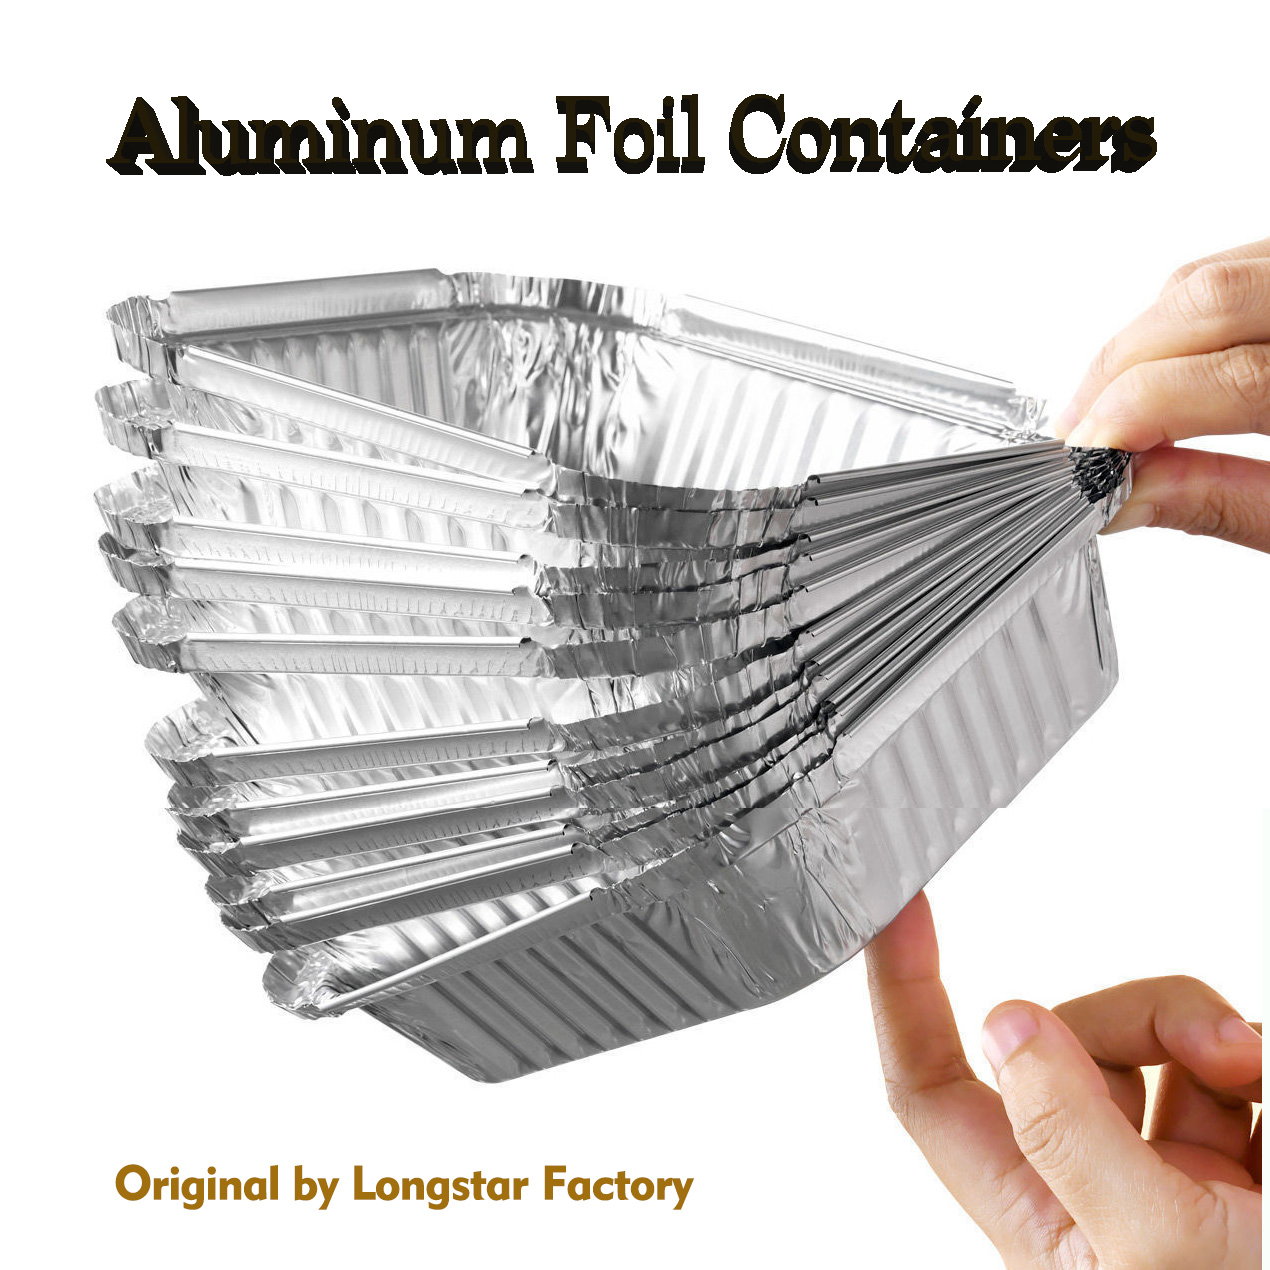 What Are The Advantages And Uses Of Aluminum Foil Containers ...